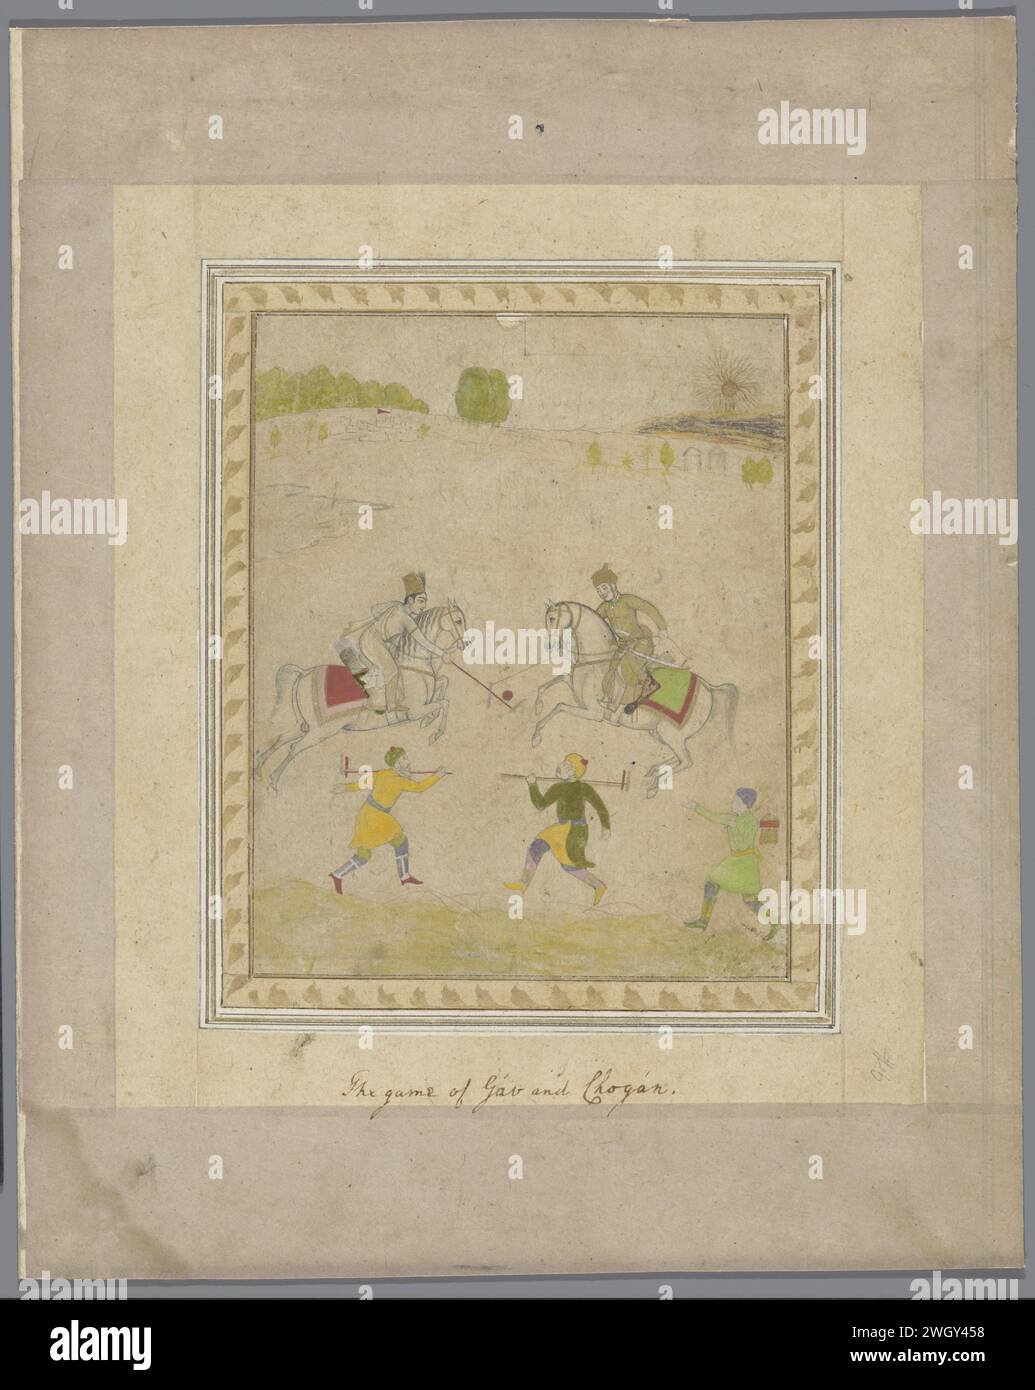 Polo Players, Anonymous Indian miniature. drawing Two men on horseback and three standing on the floor. At the bottom of the text: The Game of Gav and Chogan. On the back inscription in Persian script.  paper brush Stock Photo